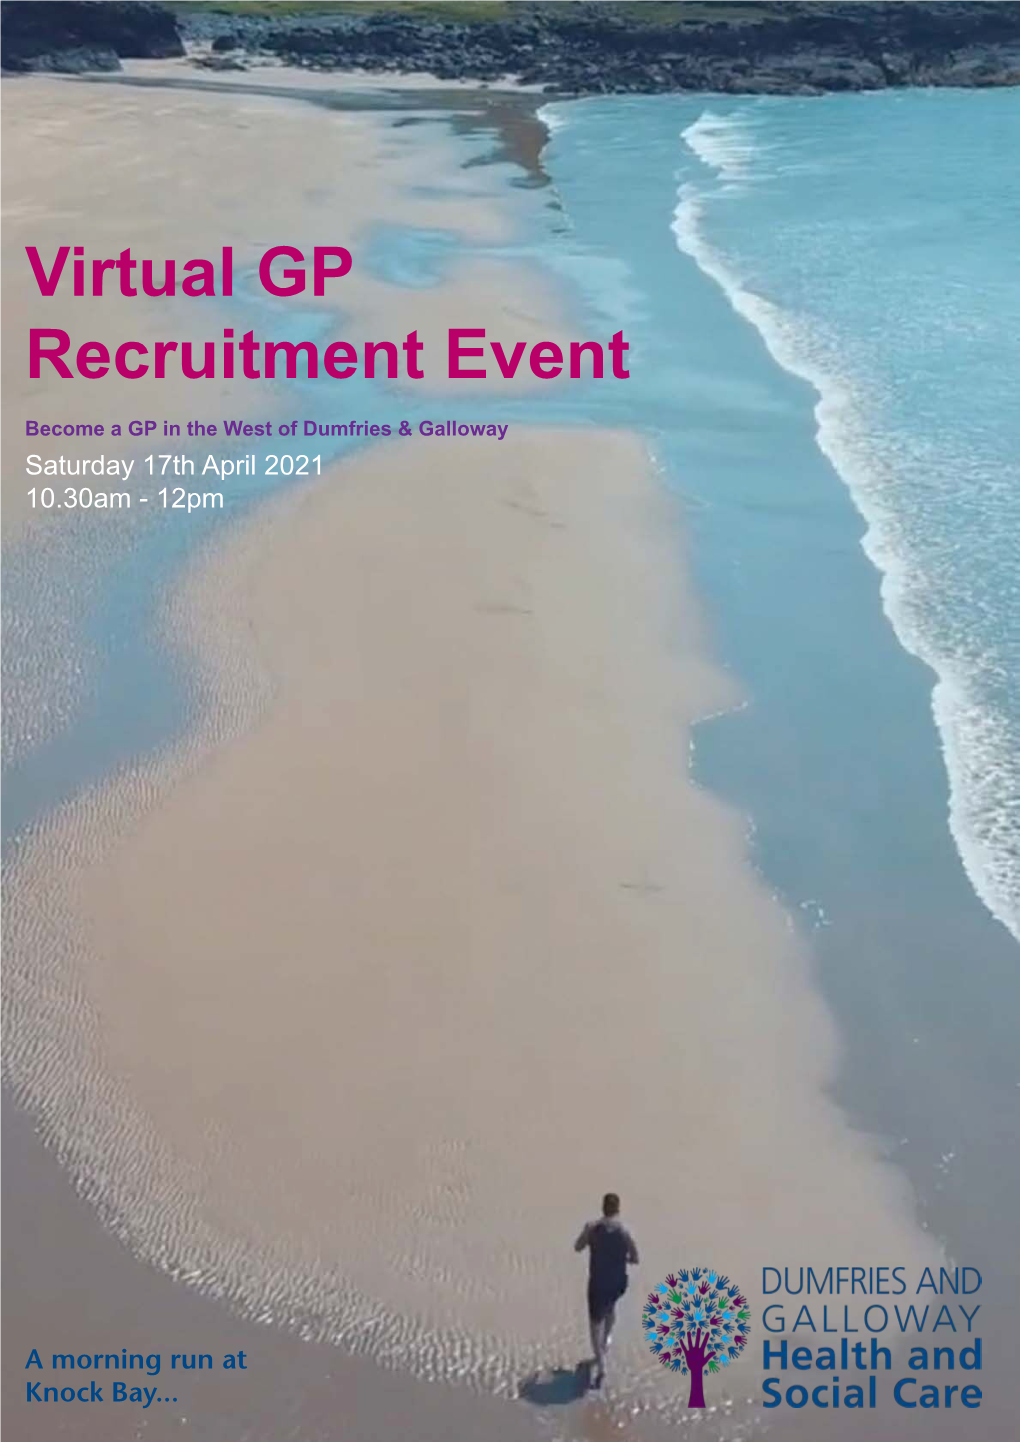 Virtual GP Recruitment Event Become a GP in the West of Dumfries & Galloway Saturday 17Th April 2021 10.30Am - 12Pm